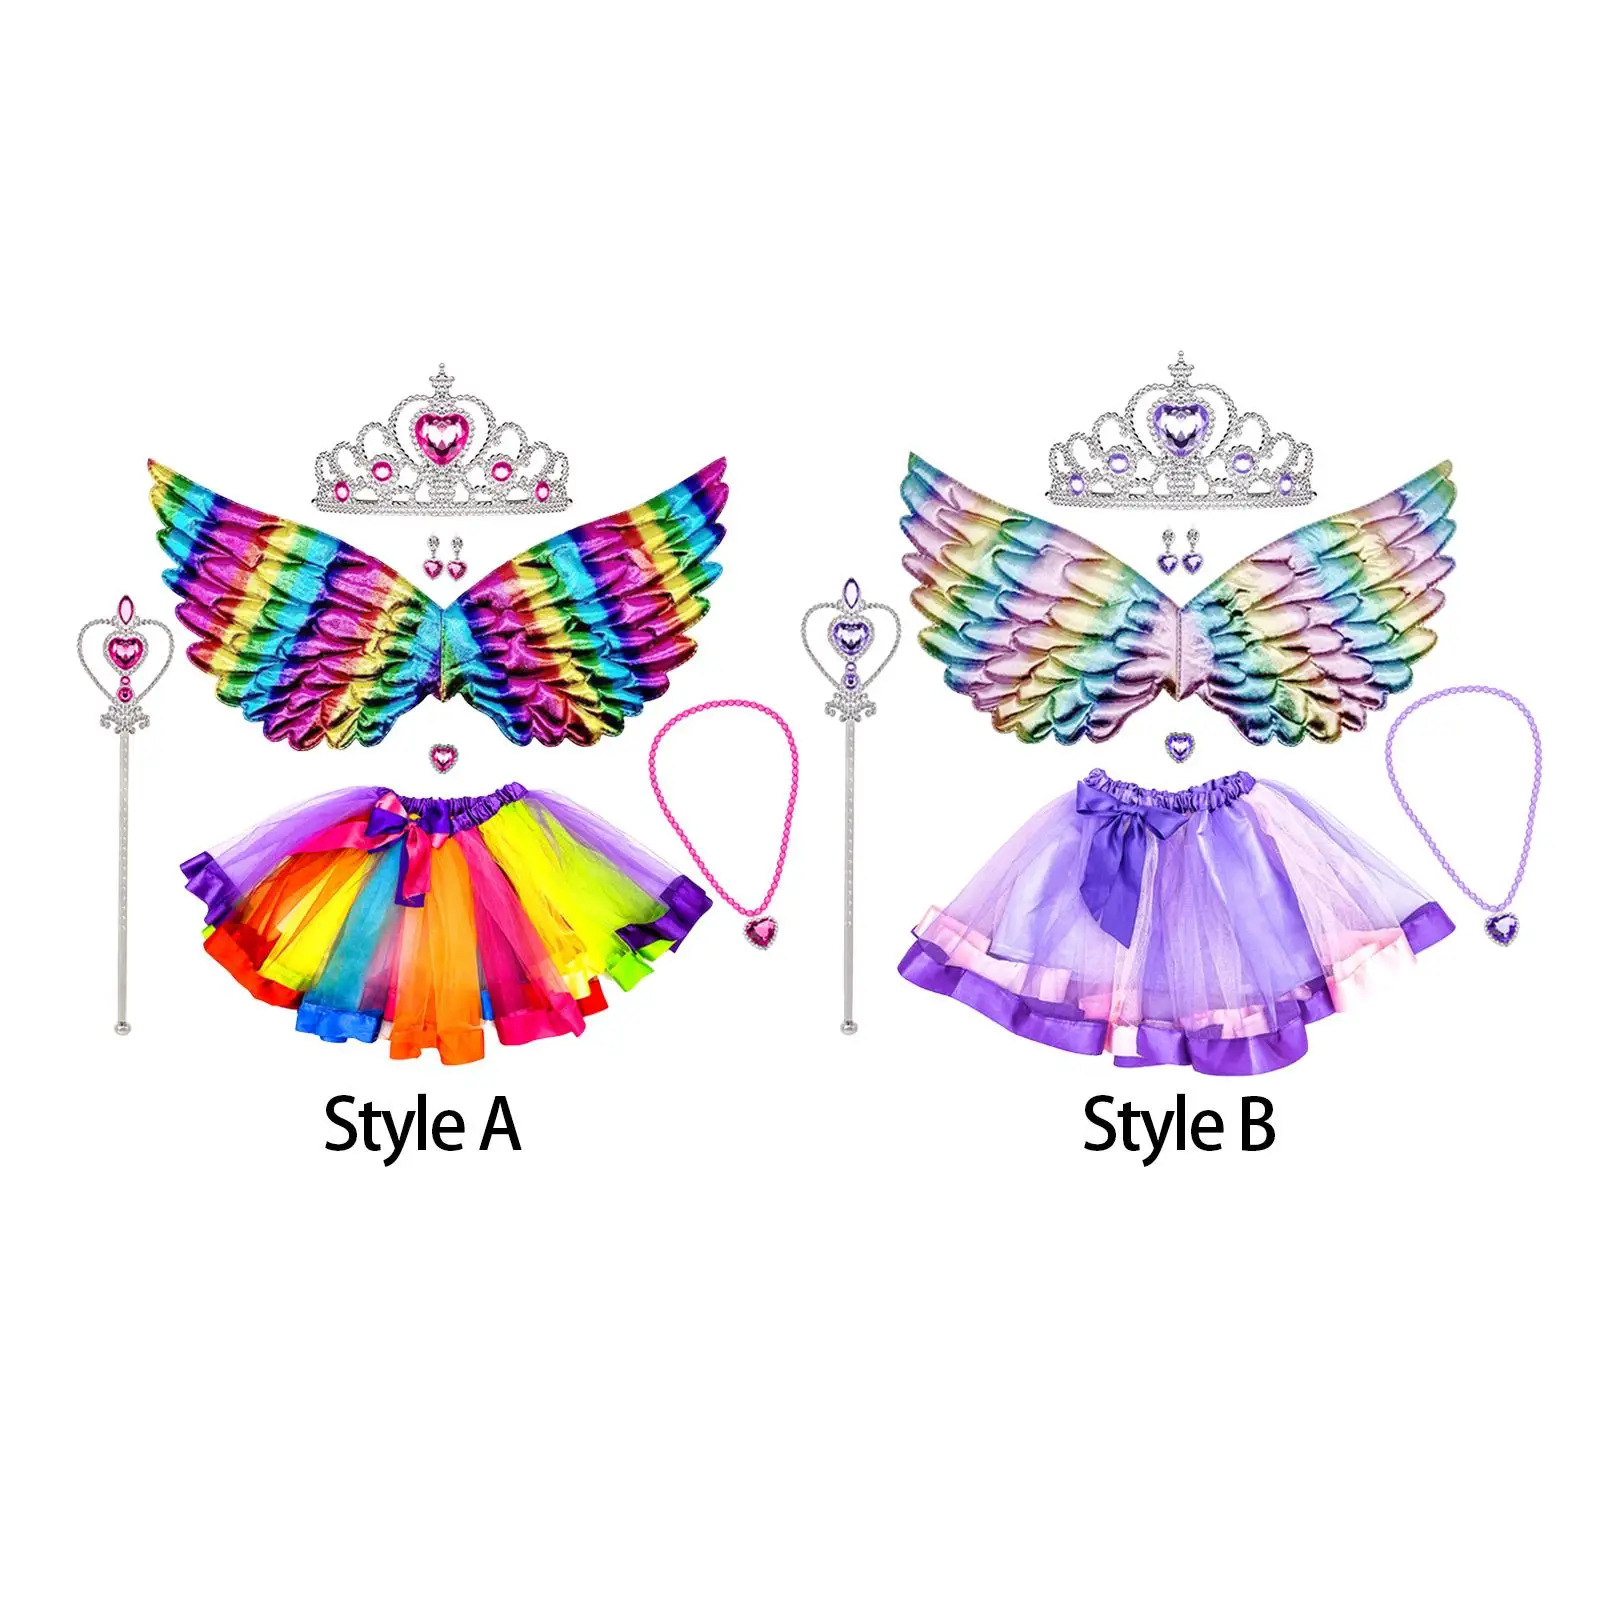 

Fairy Costumes for Girls Cosplay Pretend Toy Party Favors Princess Tutu Skirts for Halloween Carnivals Festival Nightclub